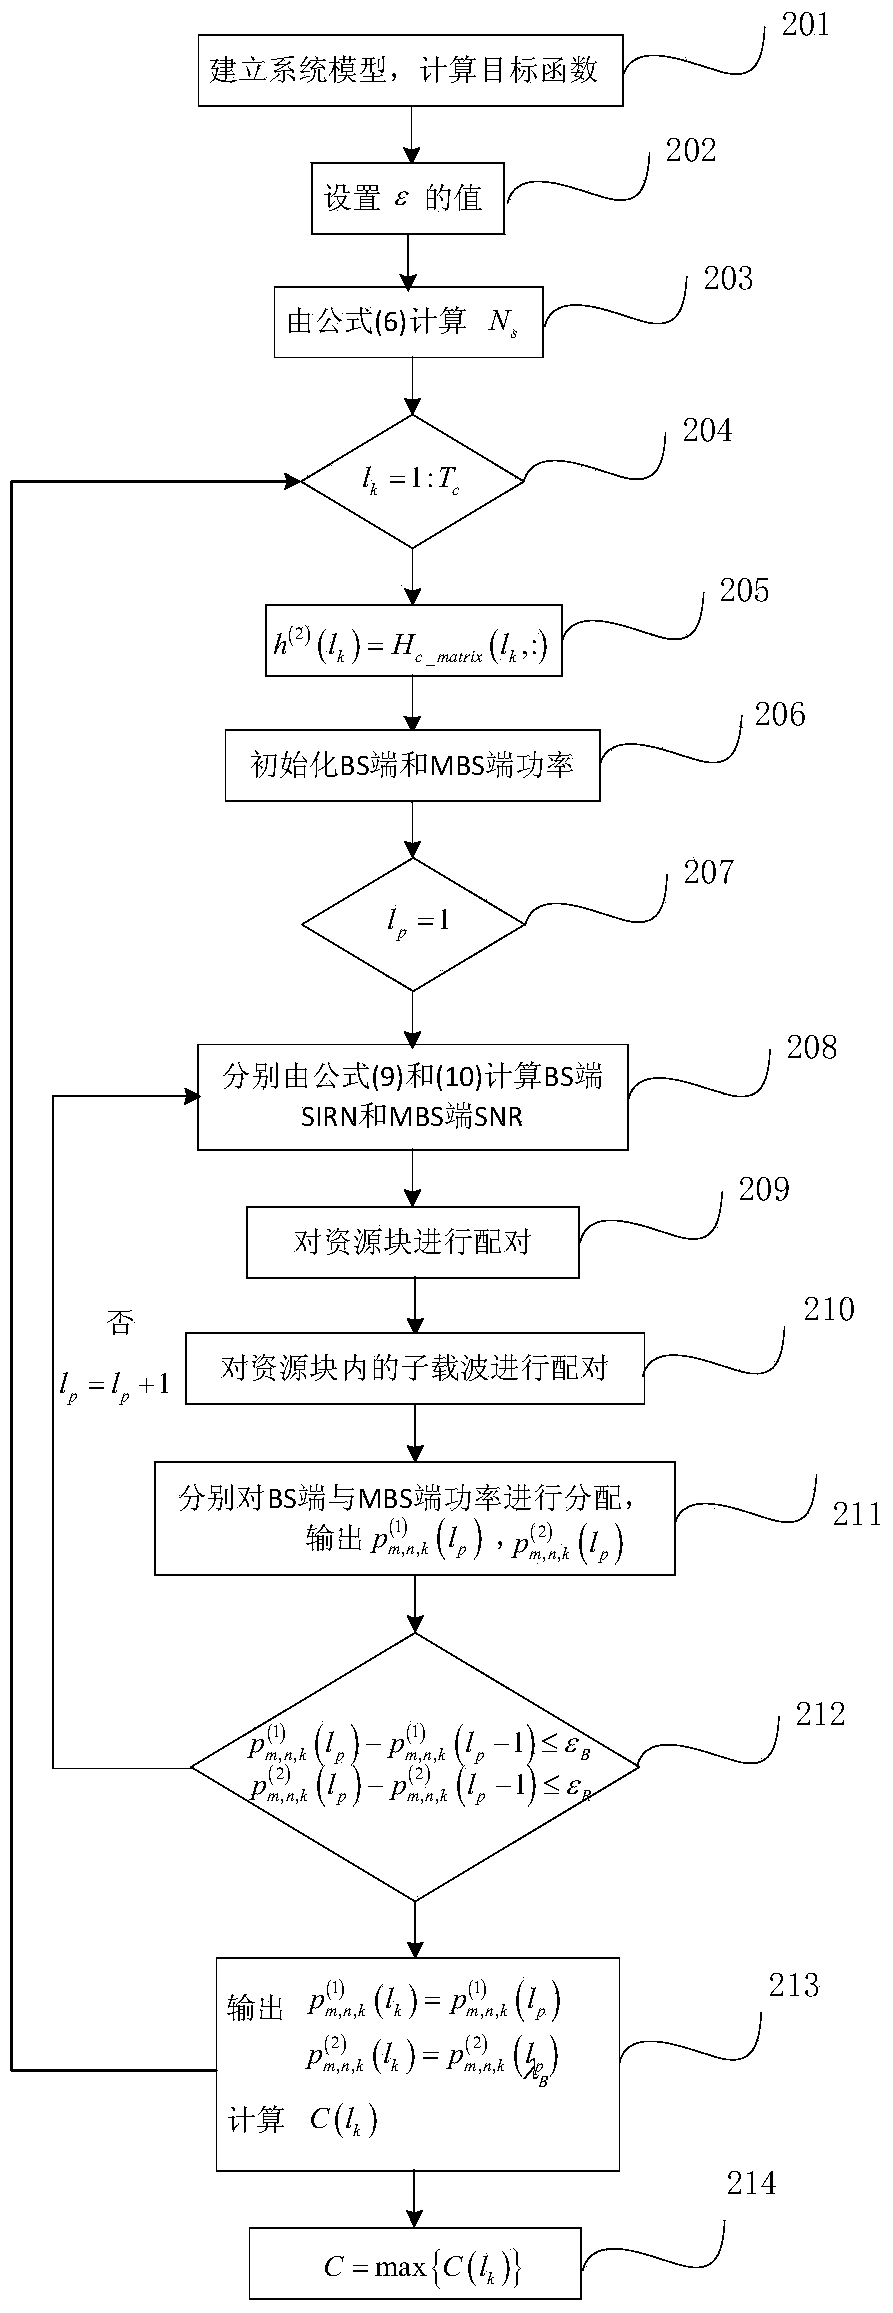 Resource allocation method under high-speed rail train-mounted base station communication architecture